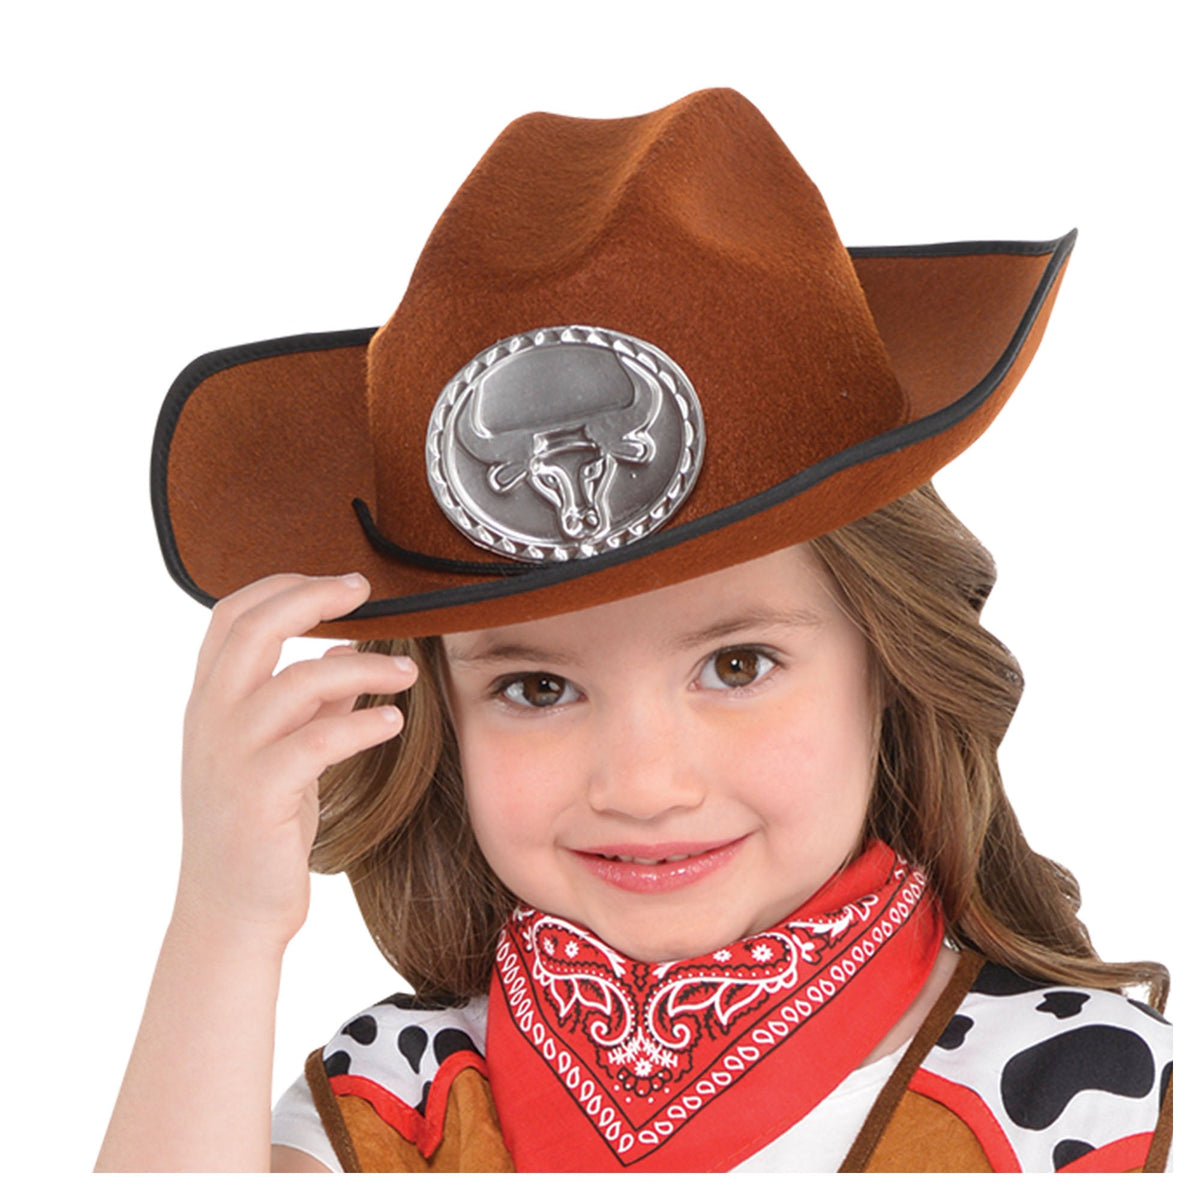 SUIT YOURSELF COSTUME CO. Costume Accessories Cowboy Hat for Kids with Badge 809801791854